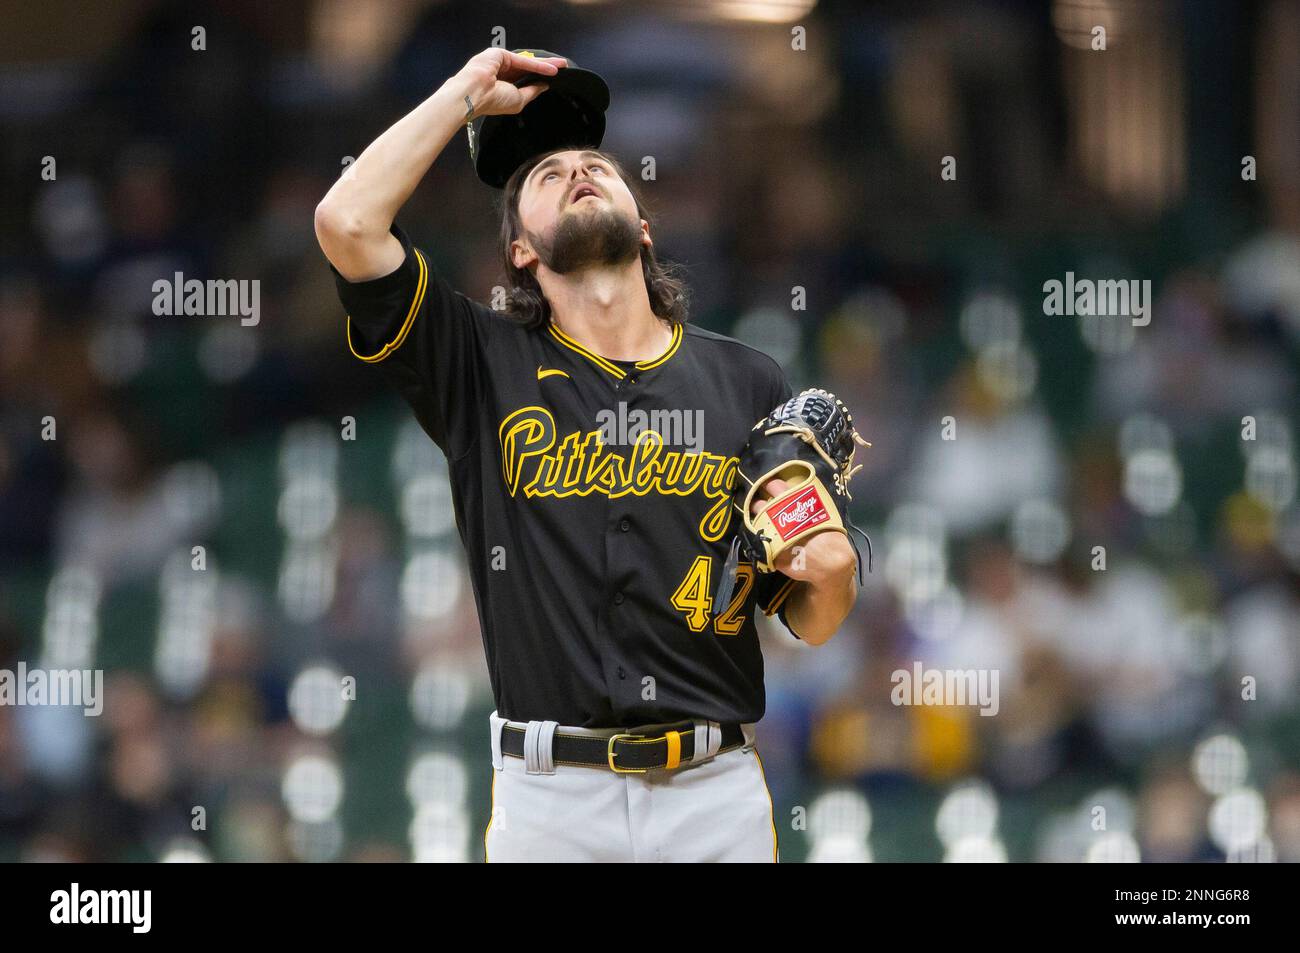 April 16, 2021: Pittsburgh Pirates starting pitcher JT Brubaker #42 reacts  after getting out of the 5th inning in the Major League Baseball game  between the Milwaukee Brewers and the Pittsburgh Pirates